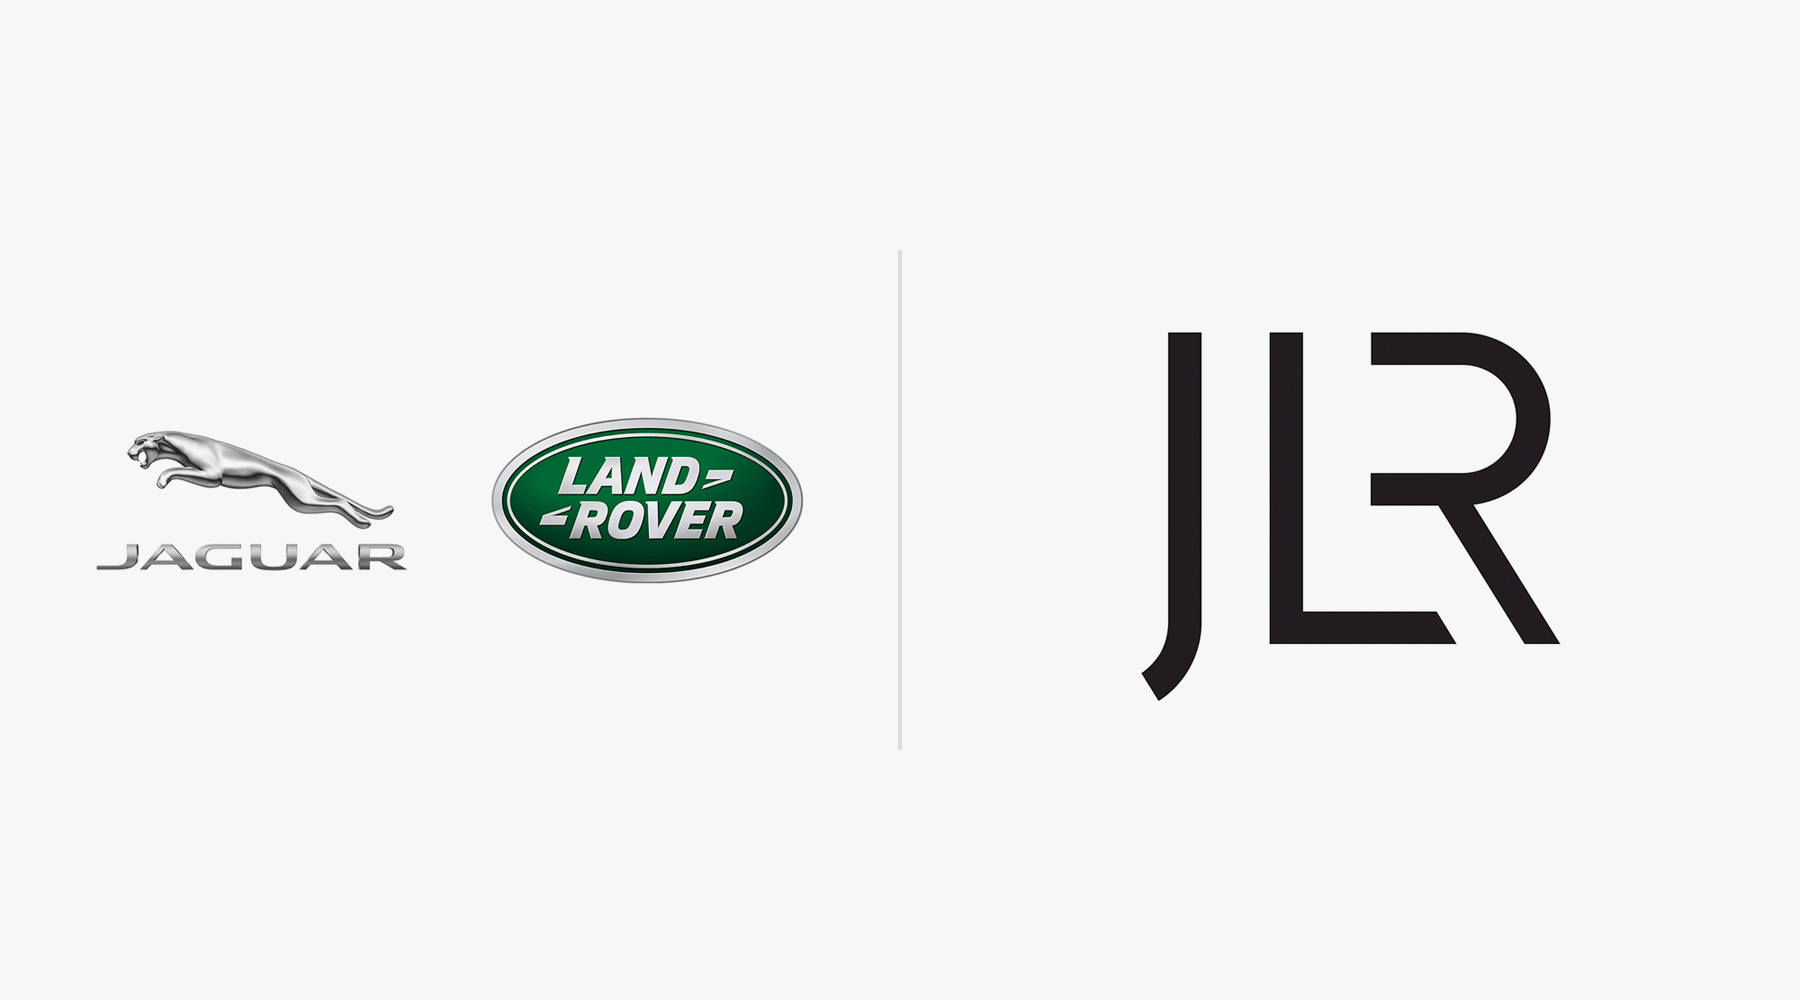 New Name and Logo for JLR